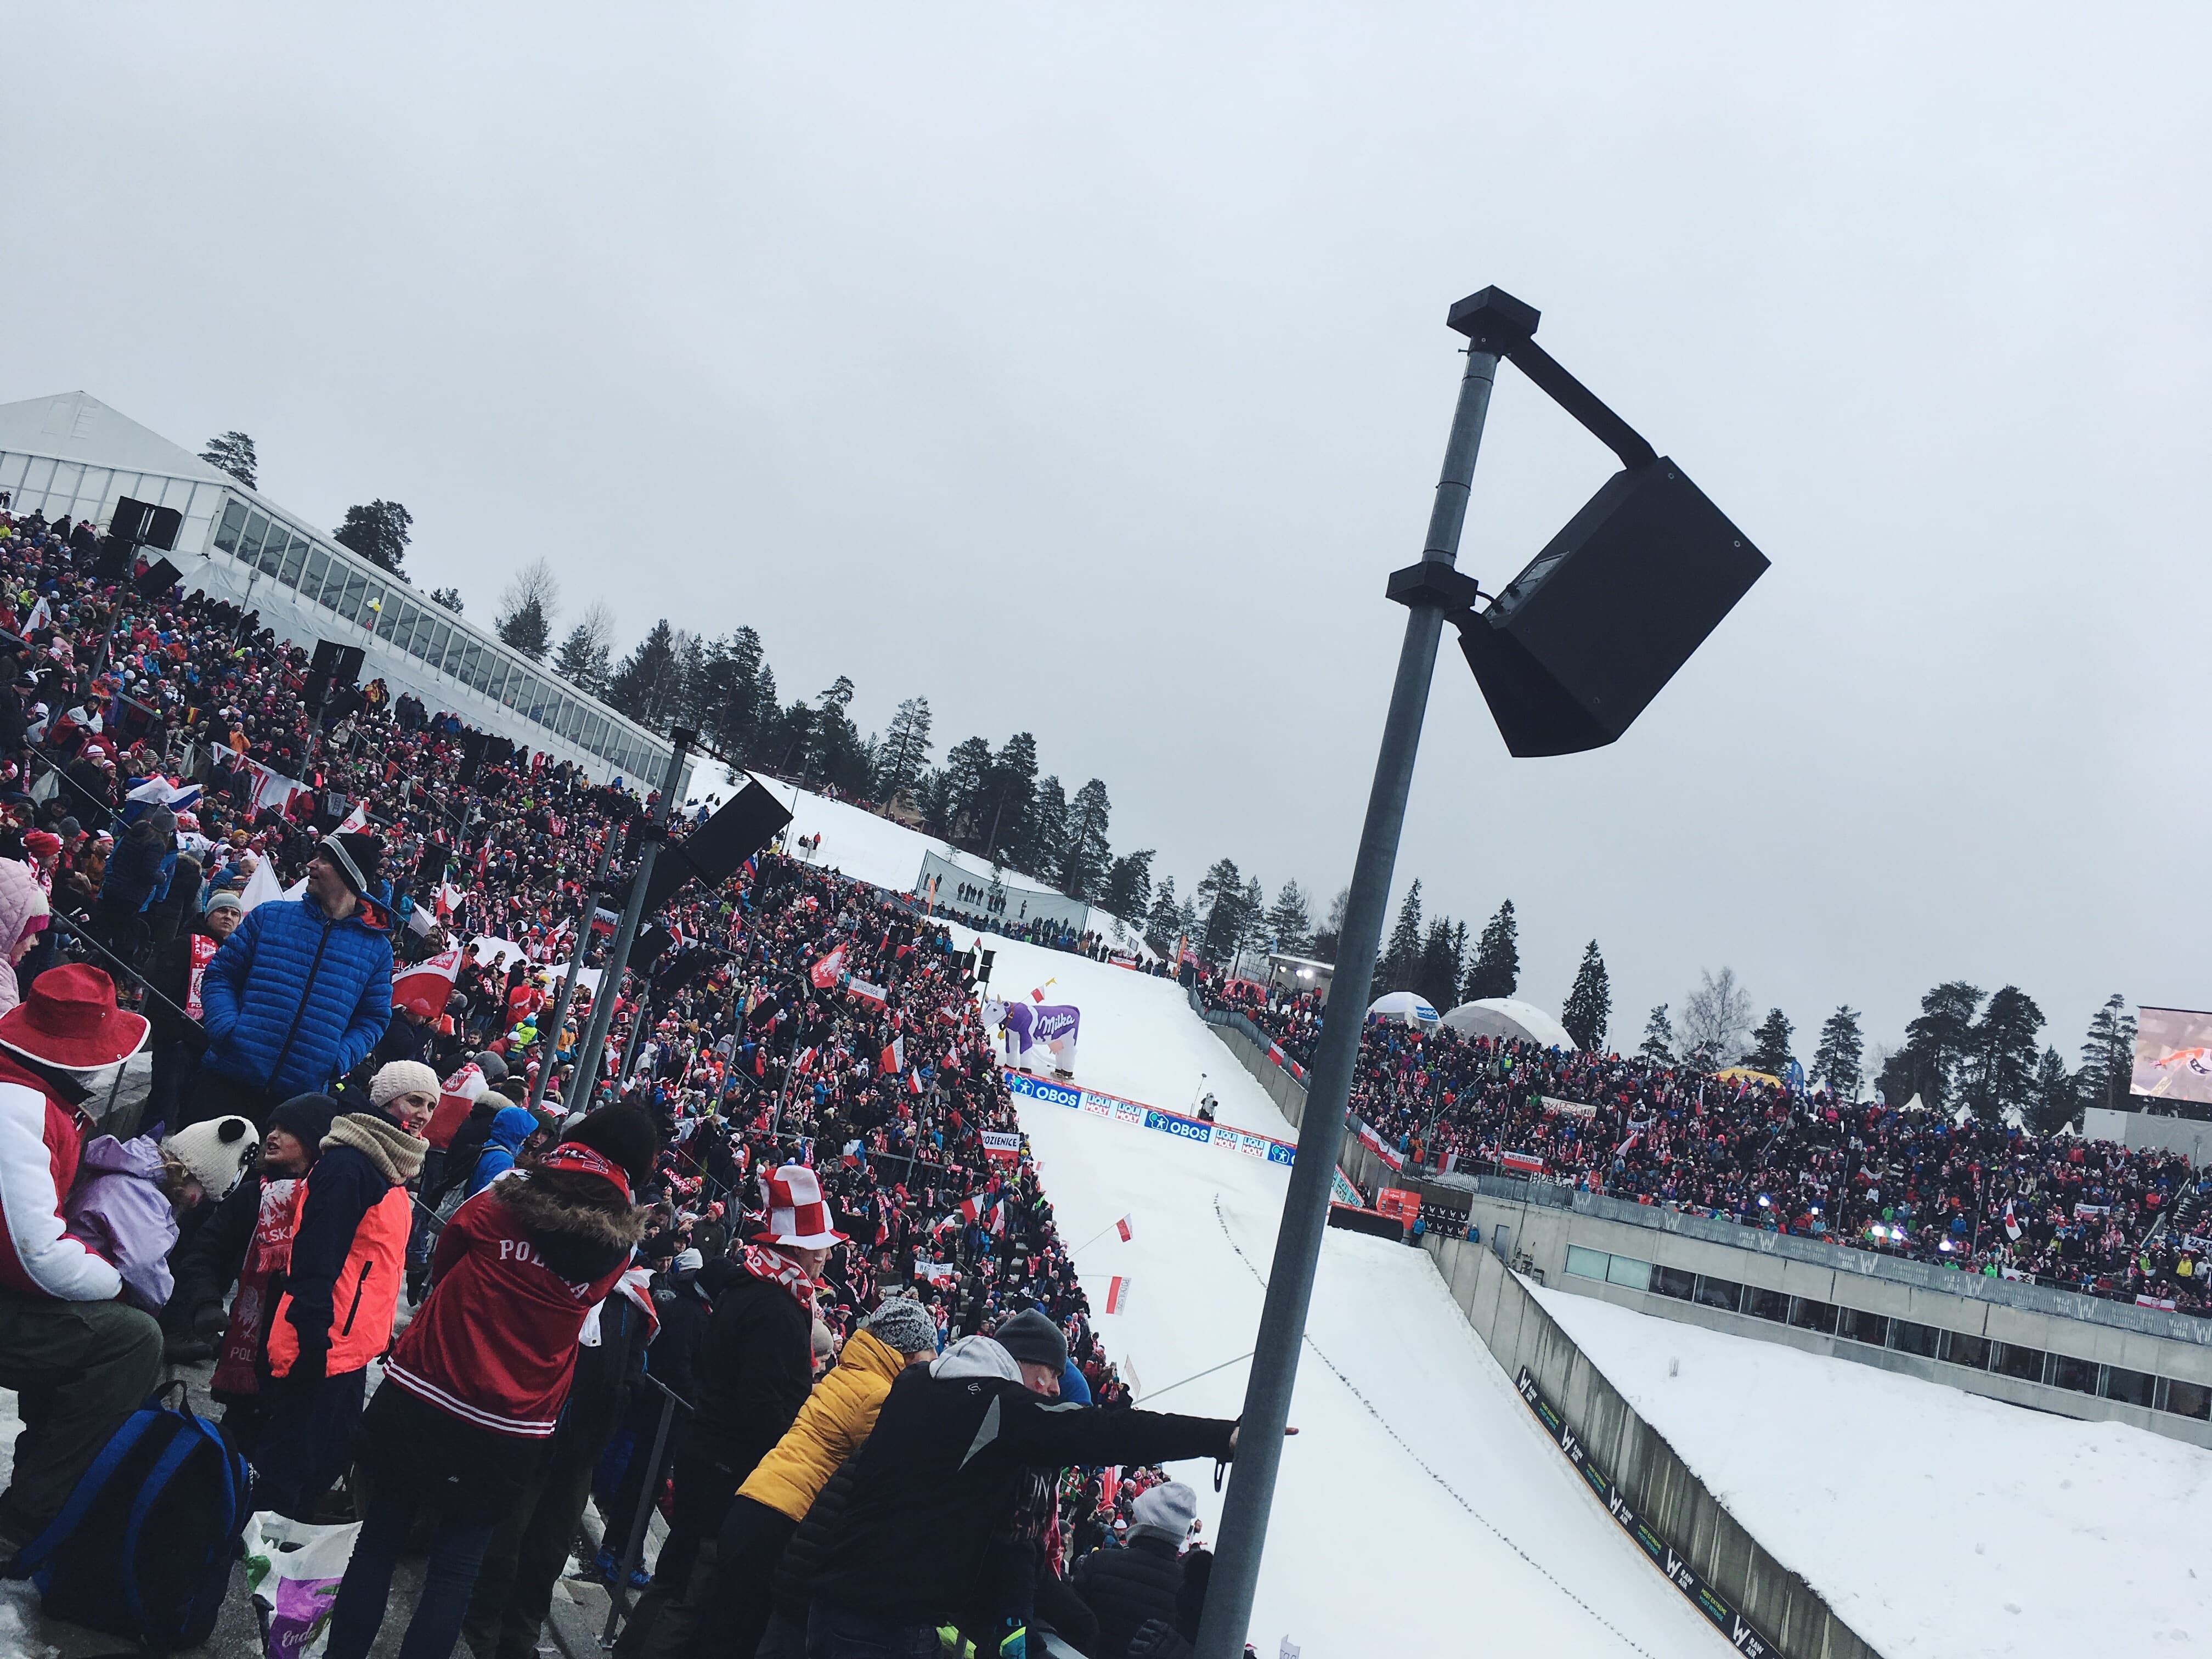 My friends and I attended a world ski jump competition at Holmenkollen (the major ski jump from the Olympics).